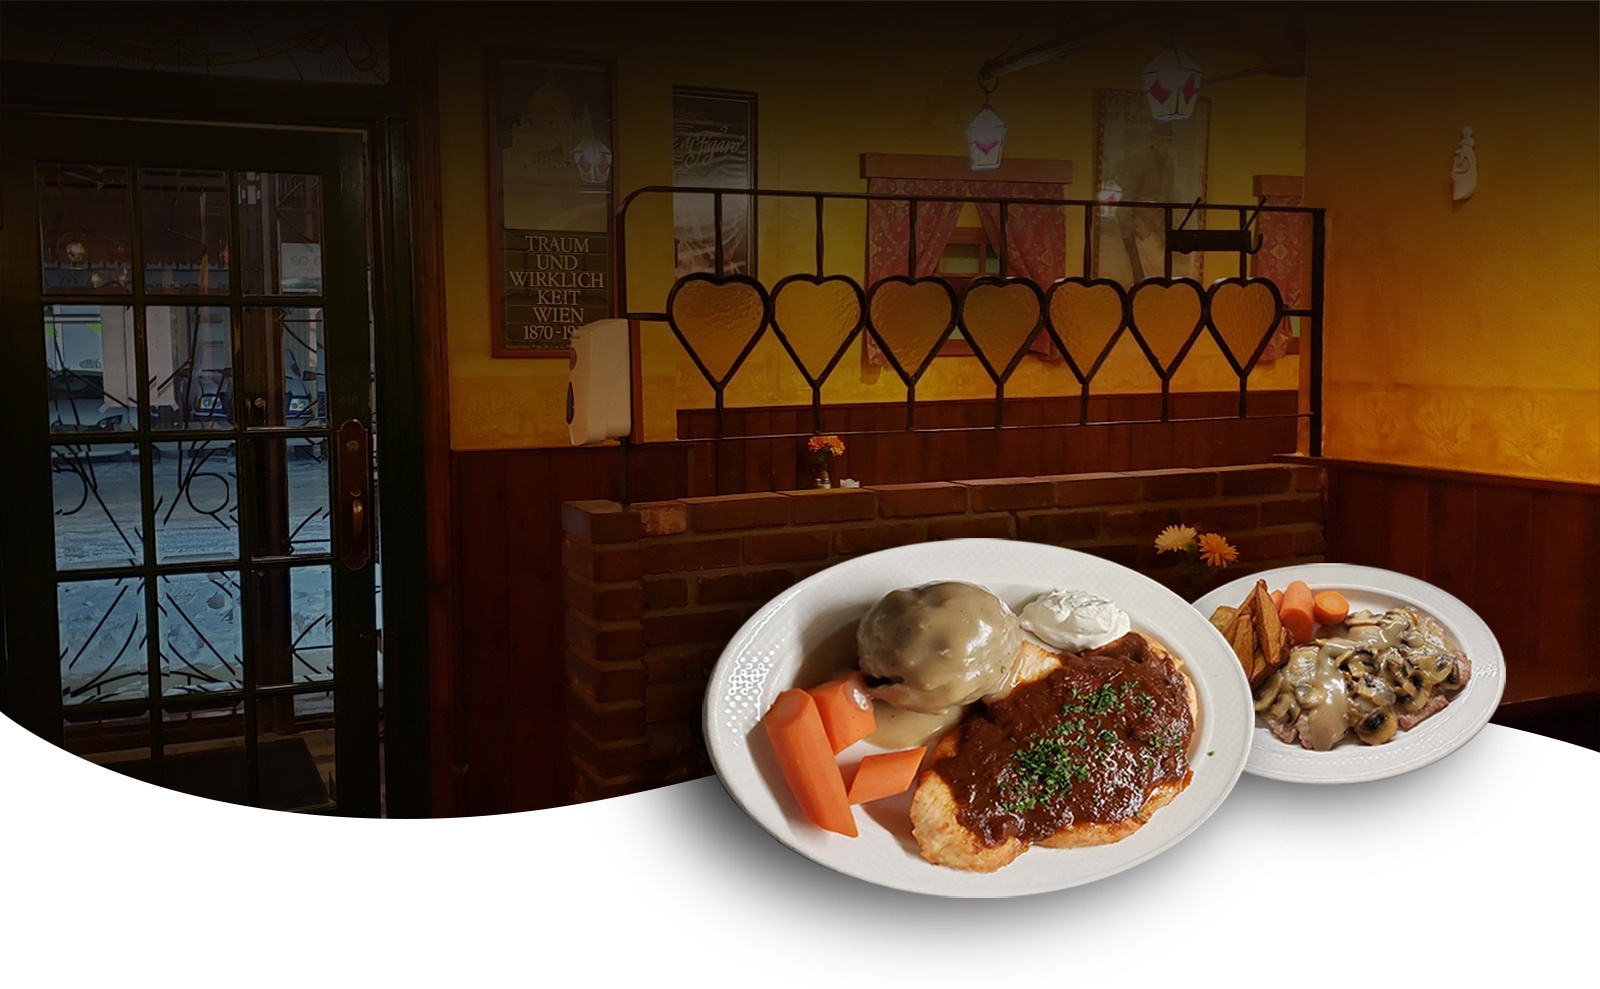 At The Bauernschmaus Restaurant in Edmonton, you get to experience and taste the flavors of Austria and German cuisine